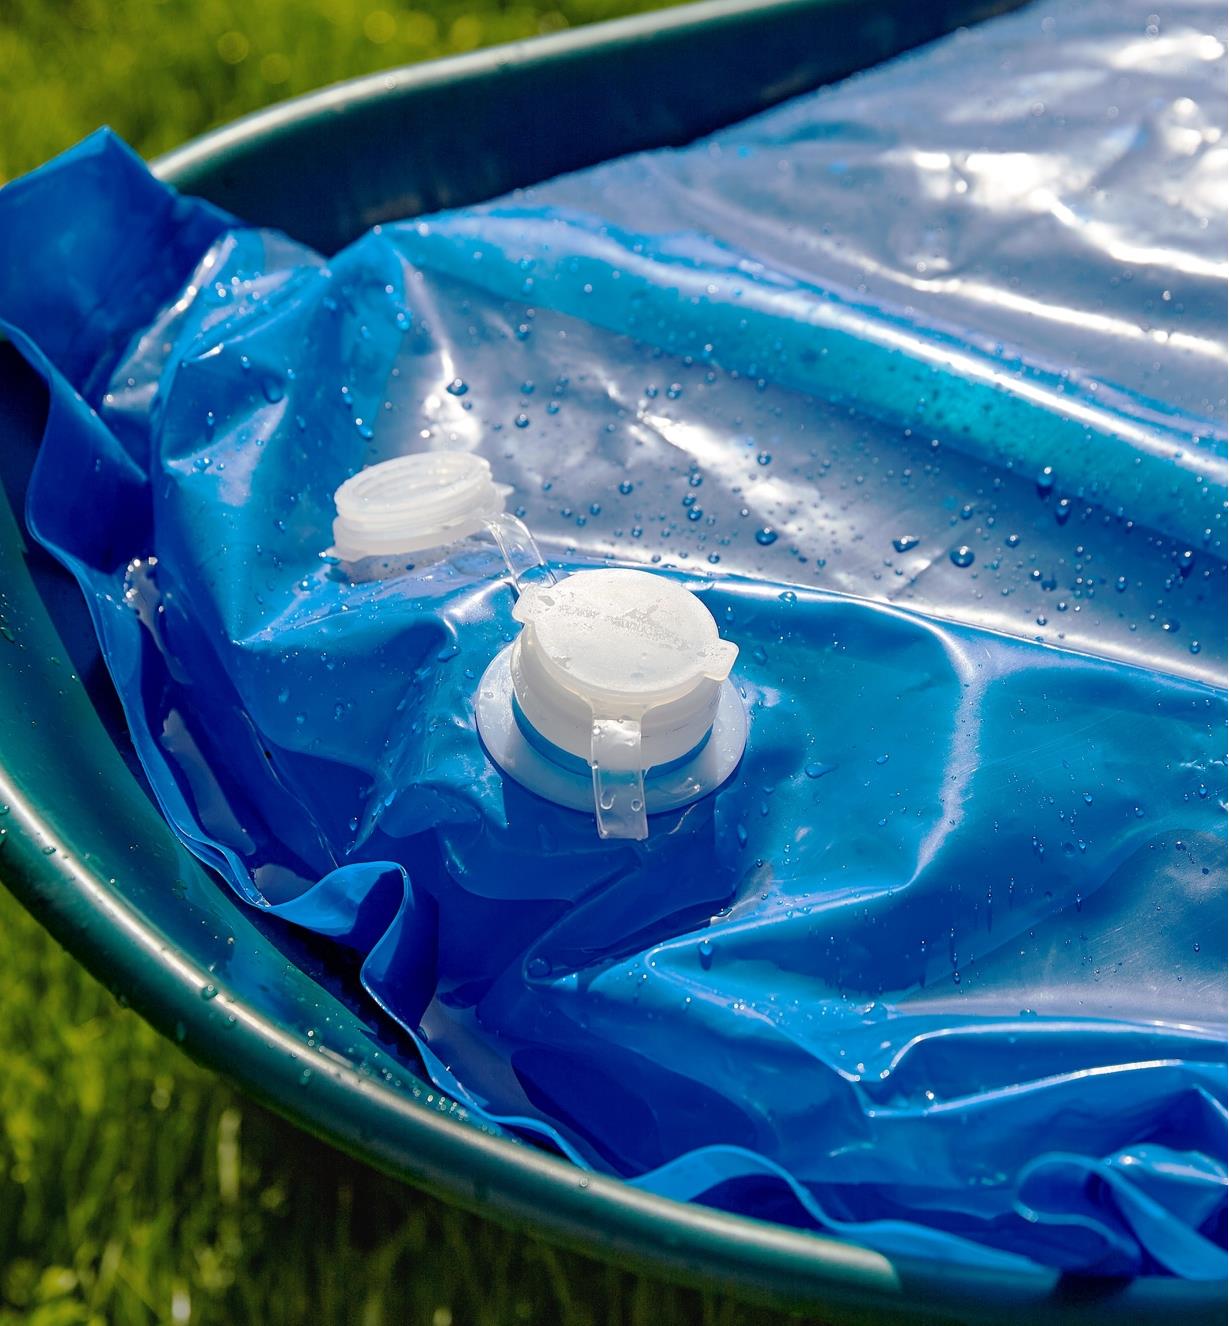 Illustrating the sealing cap on the 80 litre water bag